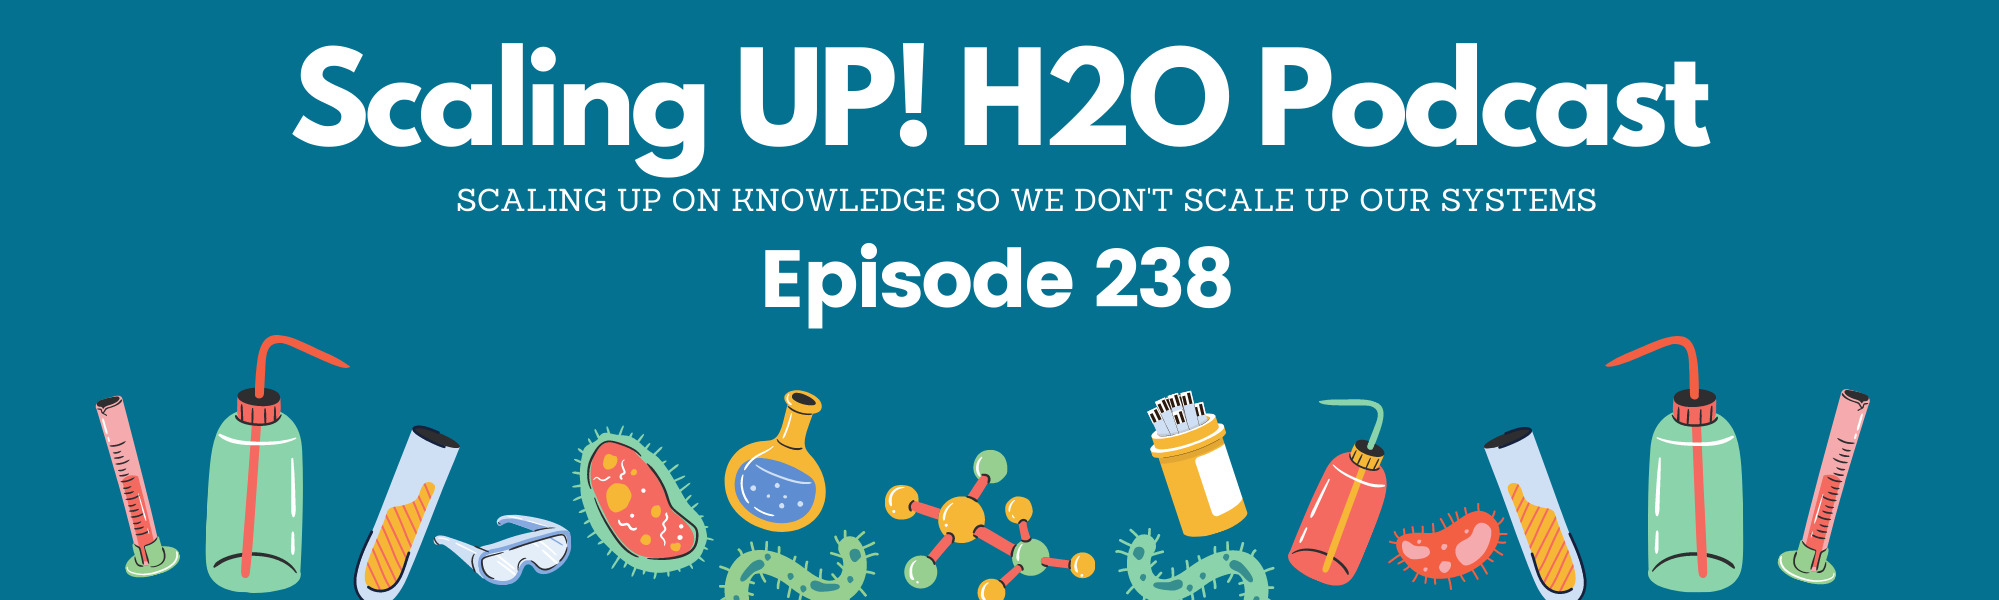 238 The One With A Field Rep Turned Water Treatment Company Founder - Scaling UP! H2O